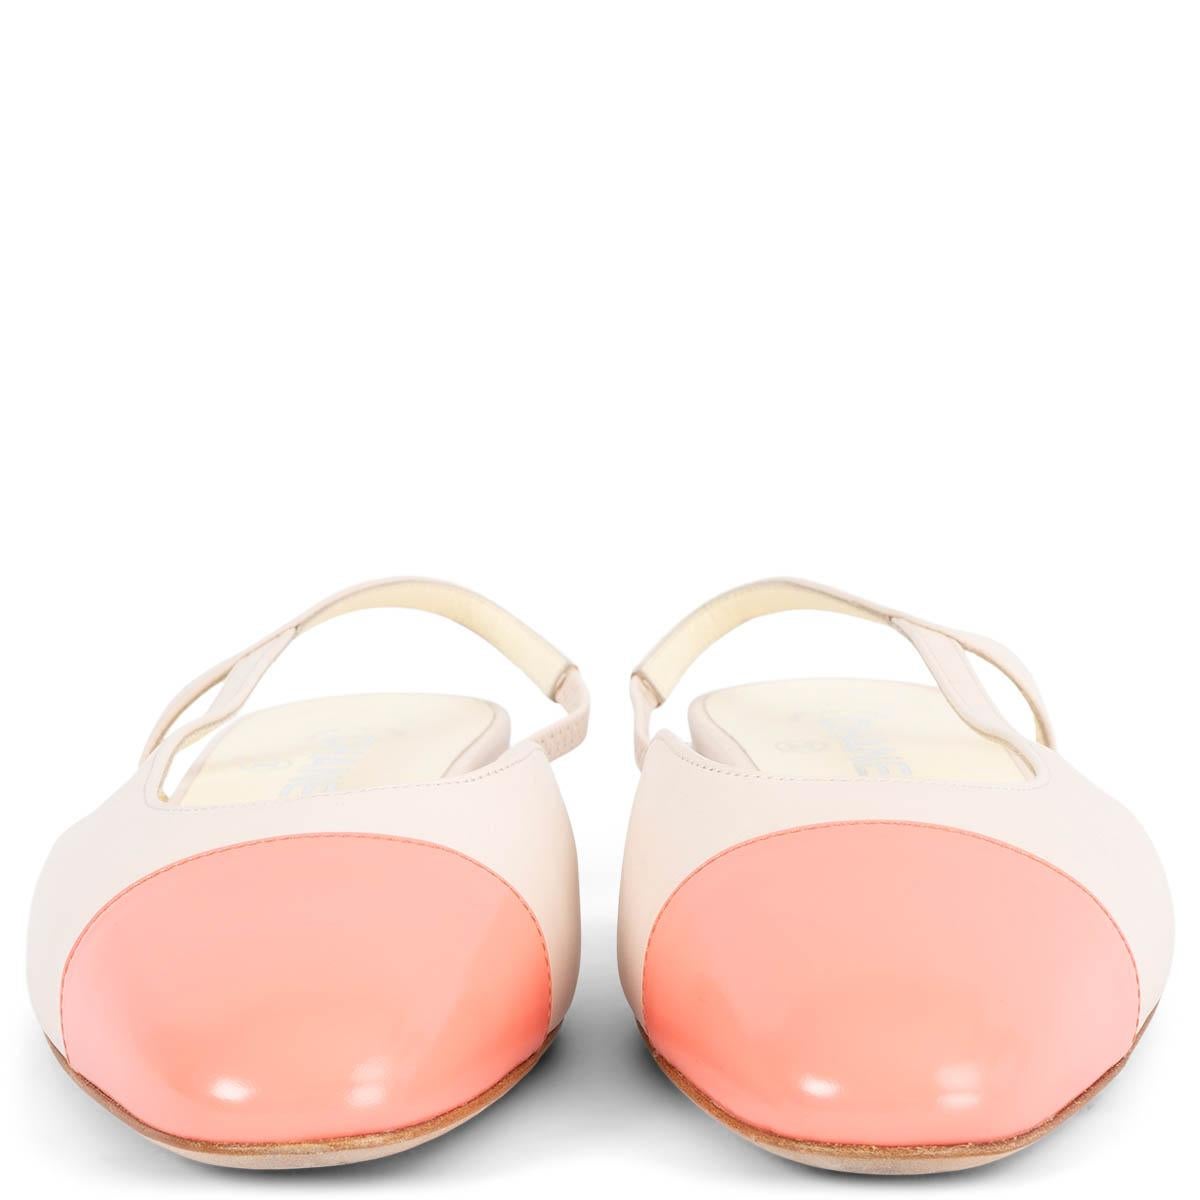 100% authentic Chanel slingback flats in off-white lambskin featuring classic cap toe in coral leather. CC in silver-tone hardware on the heel. Have been worn once or twice and show two very soft scratches on the right shoe. Overall in excellent